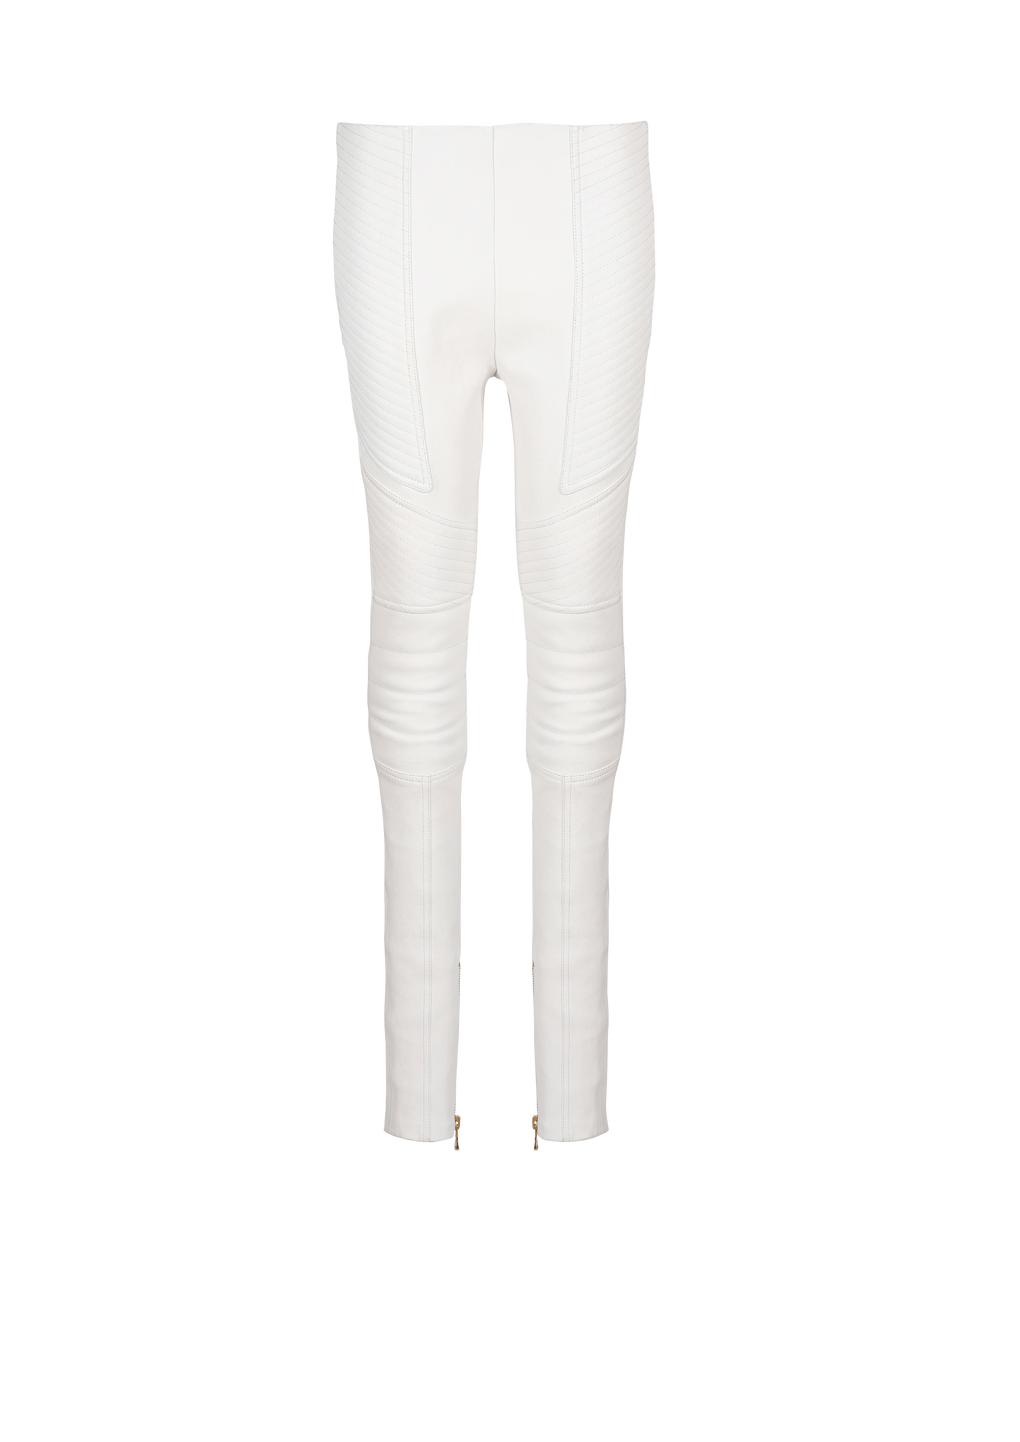 Slim-fit leather trousers, white, hi-res